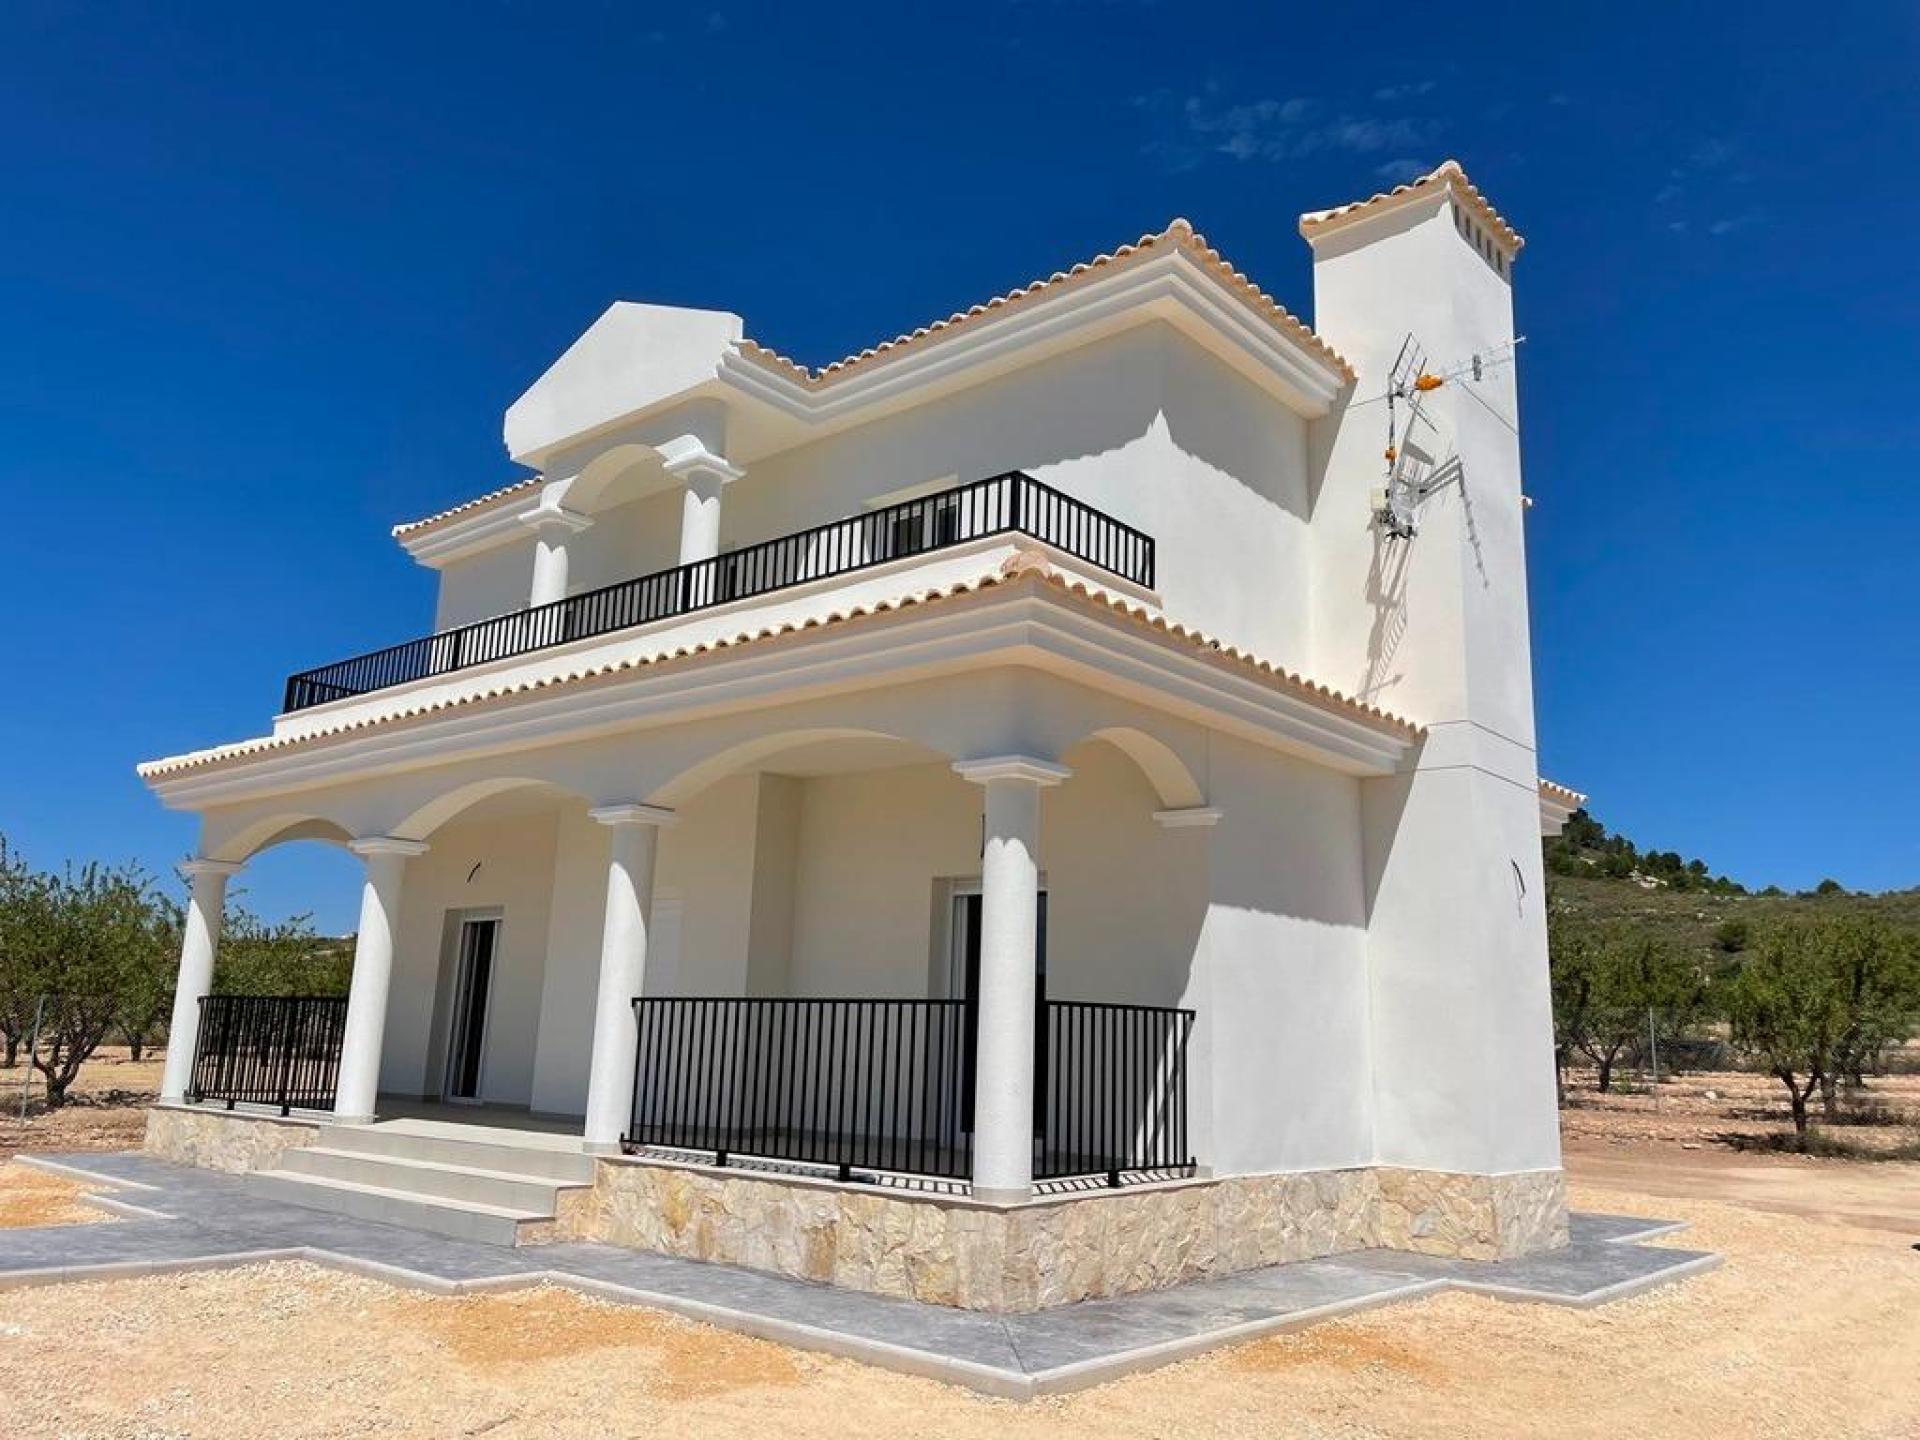 Luxury New Villas with Pool inc. land, licences & legalities in Alicante, Pinoso in Medvilla Spanje